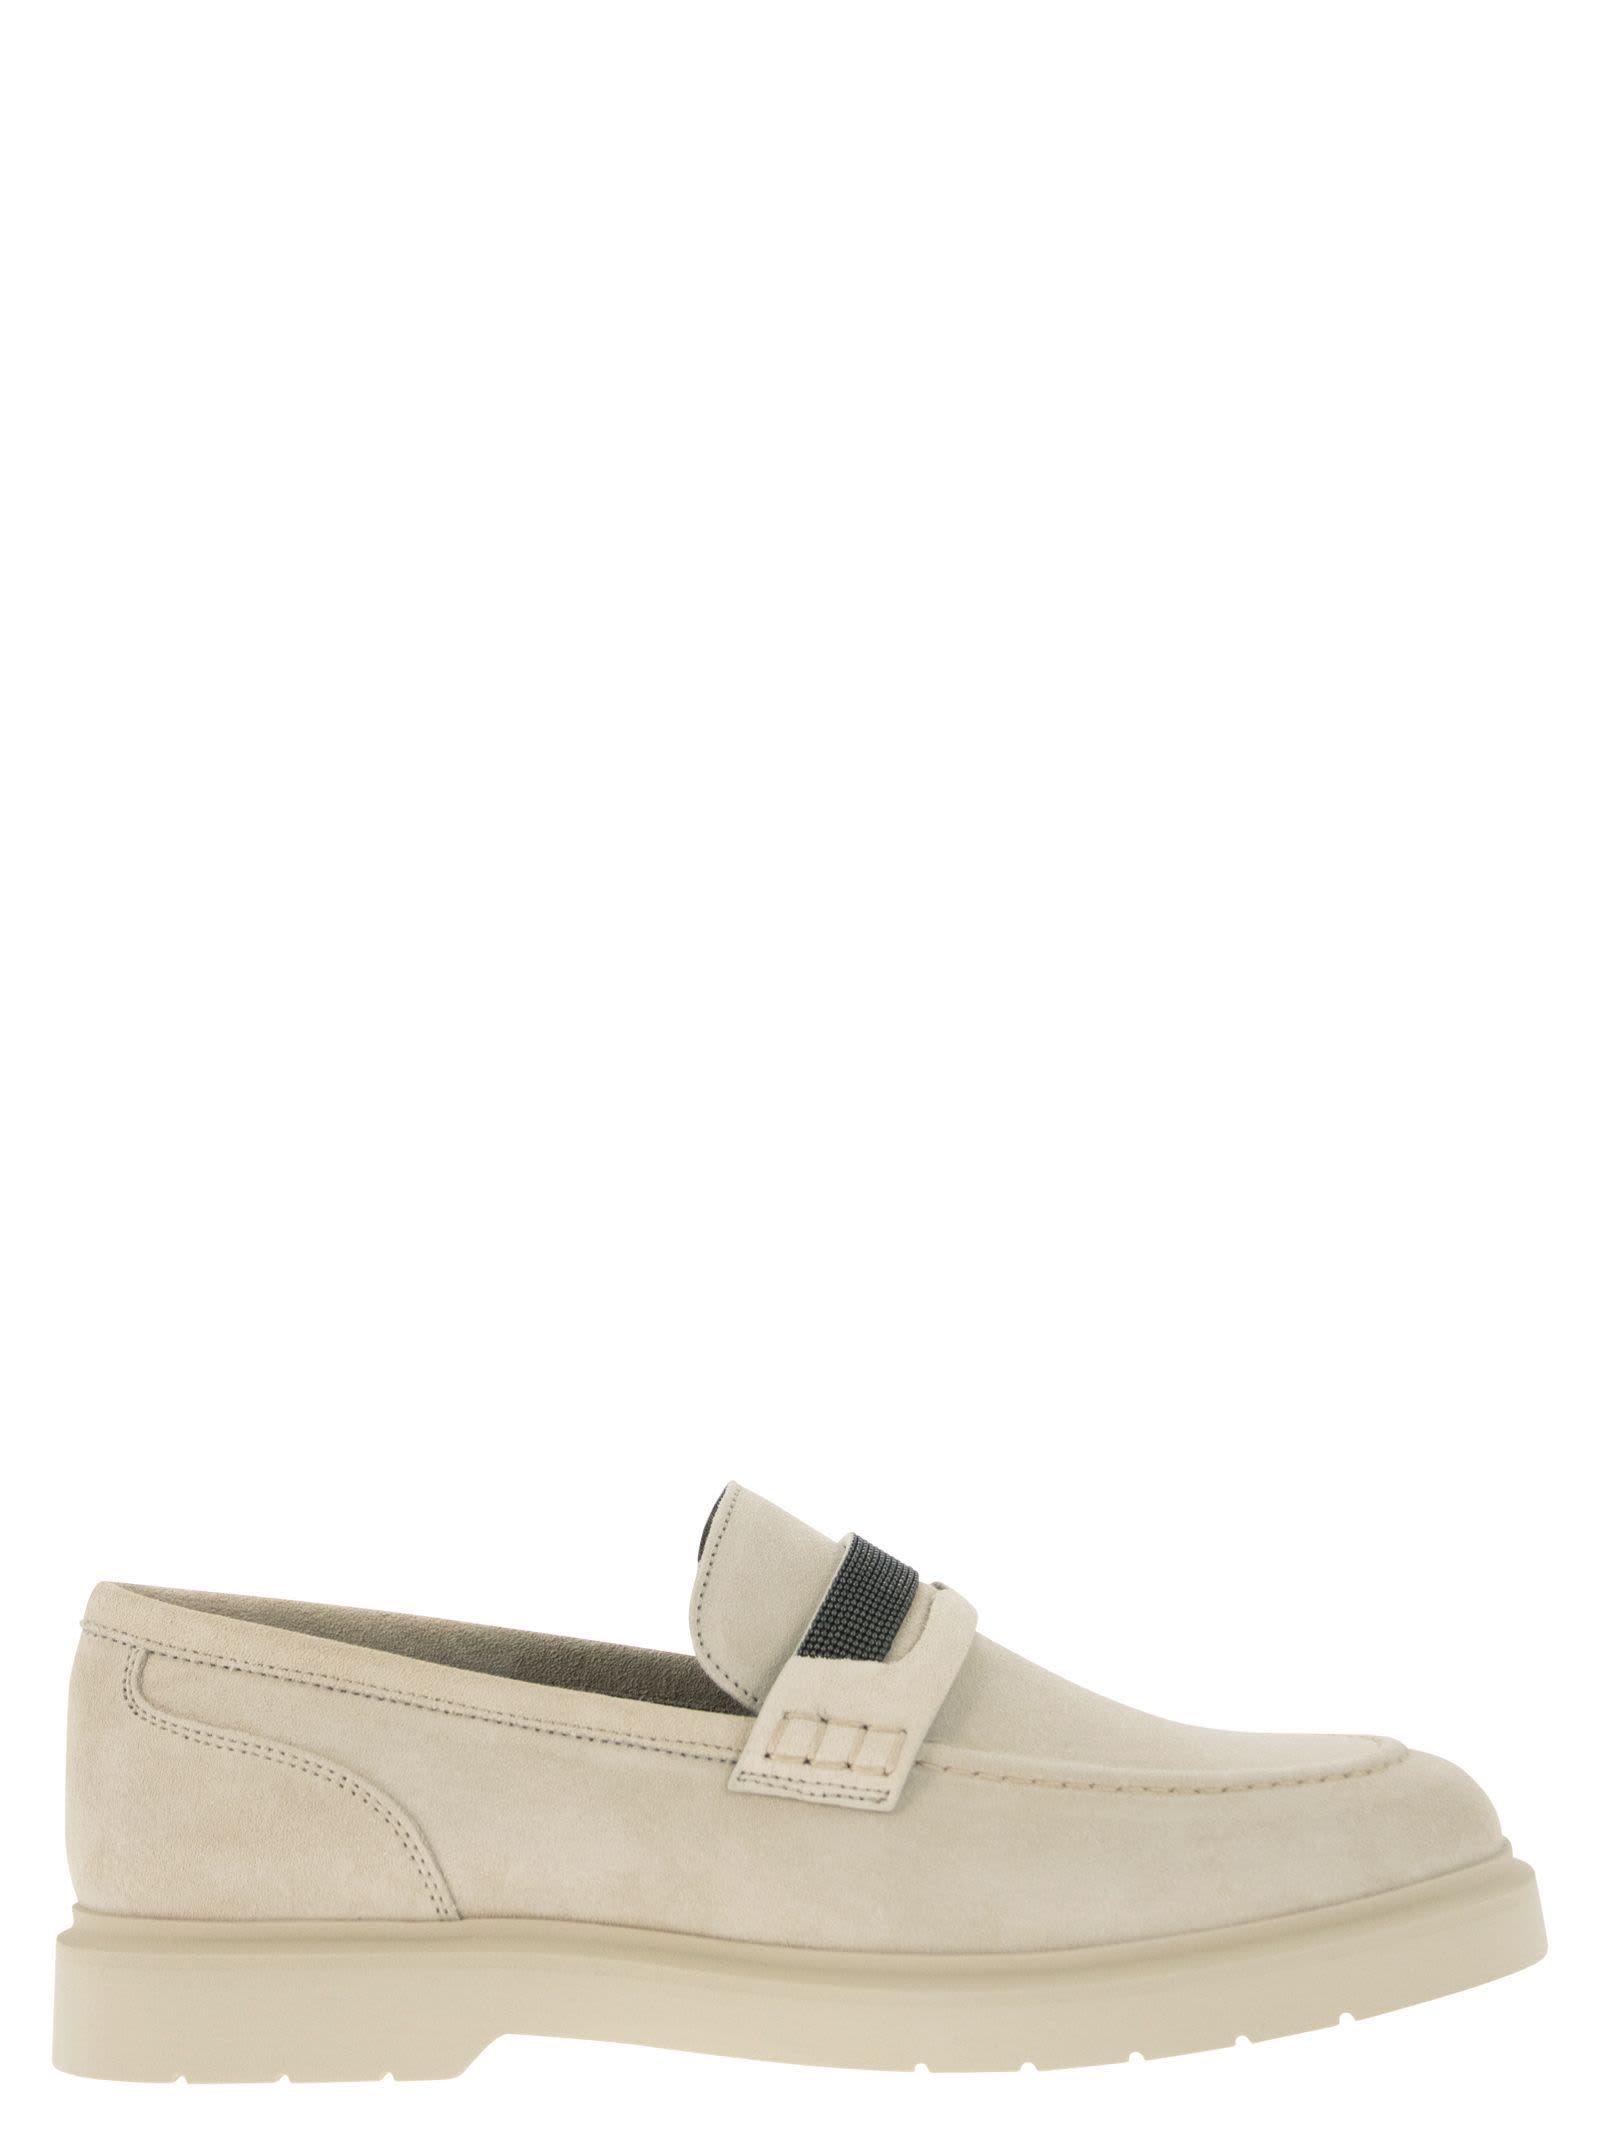 Brunello Cucinelli Suede Penny Loafer With Jewellery - Ivory - female - Size: 36.5